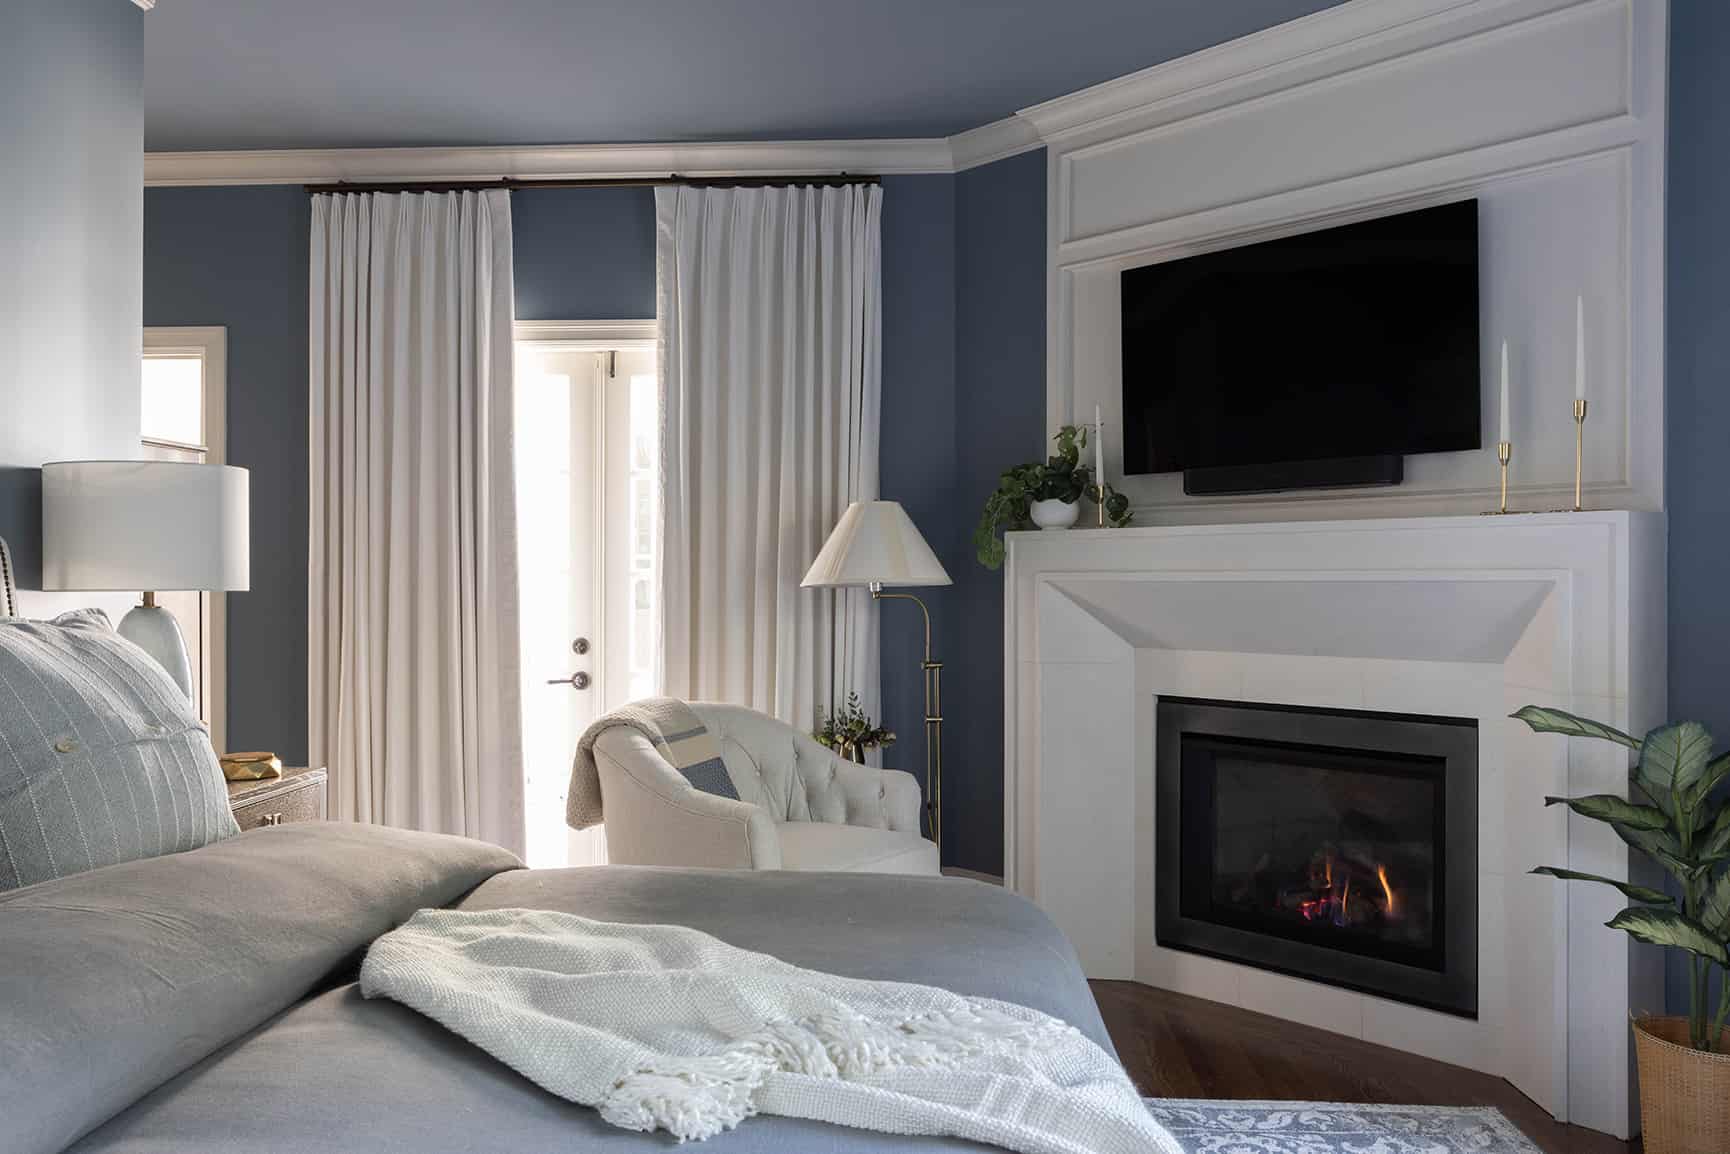 Close-up view of bedroom with blue paint and a fire burning in the fireplace.